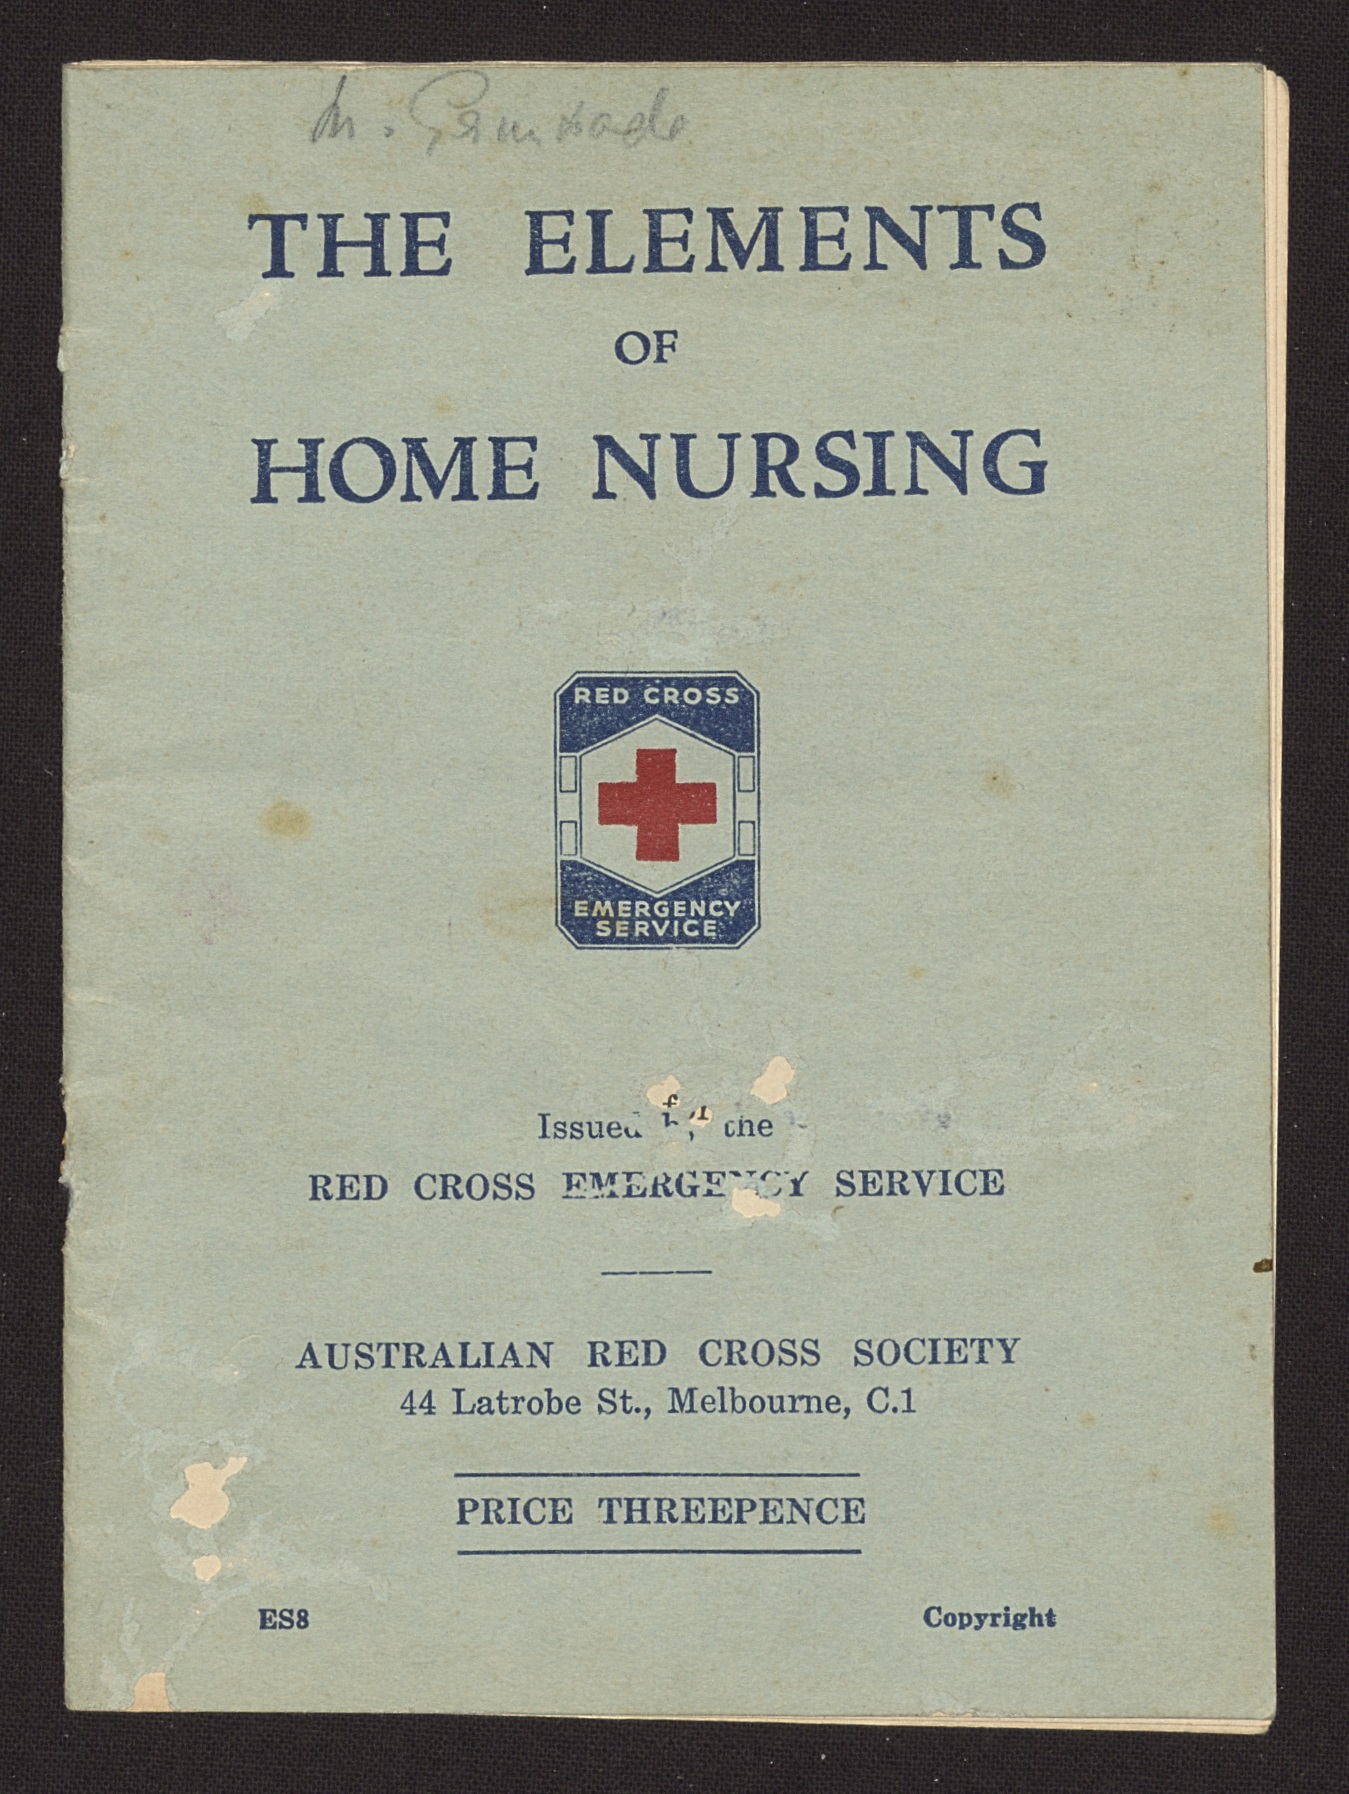 The Elements of Home Nursing with annotations by Lady Mabel Grimwade, Sir Wilfrid Russell and Lady Mabel Grimwade collection, 1975.0089.00332